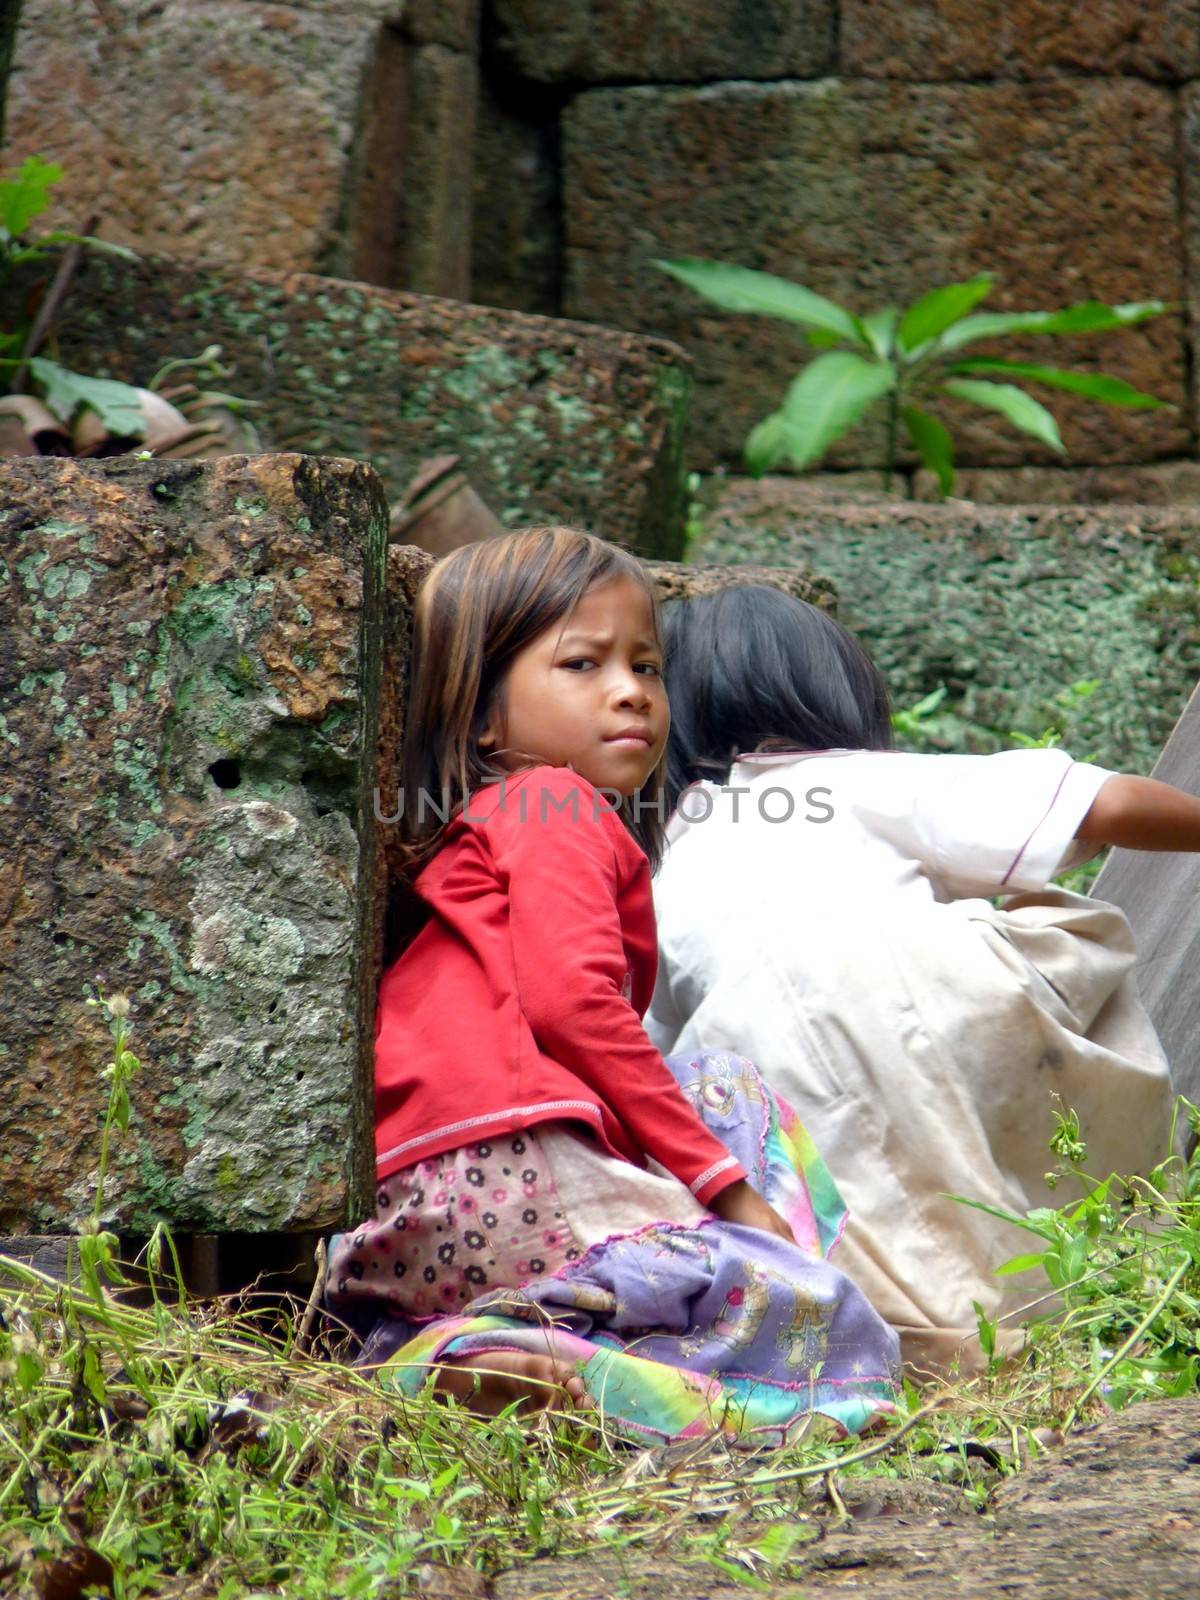 Cambodian young girls at Banteay Srei ruins temple in Siem reap, Cambodia